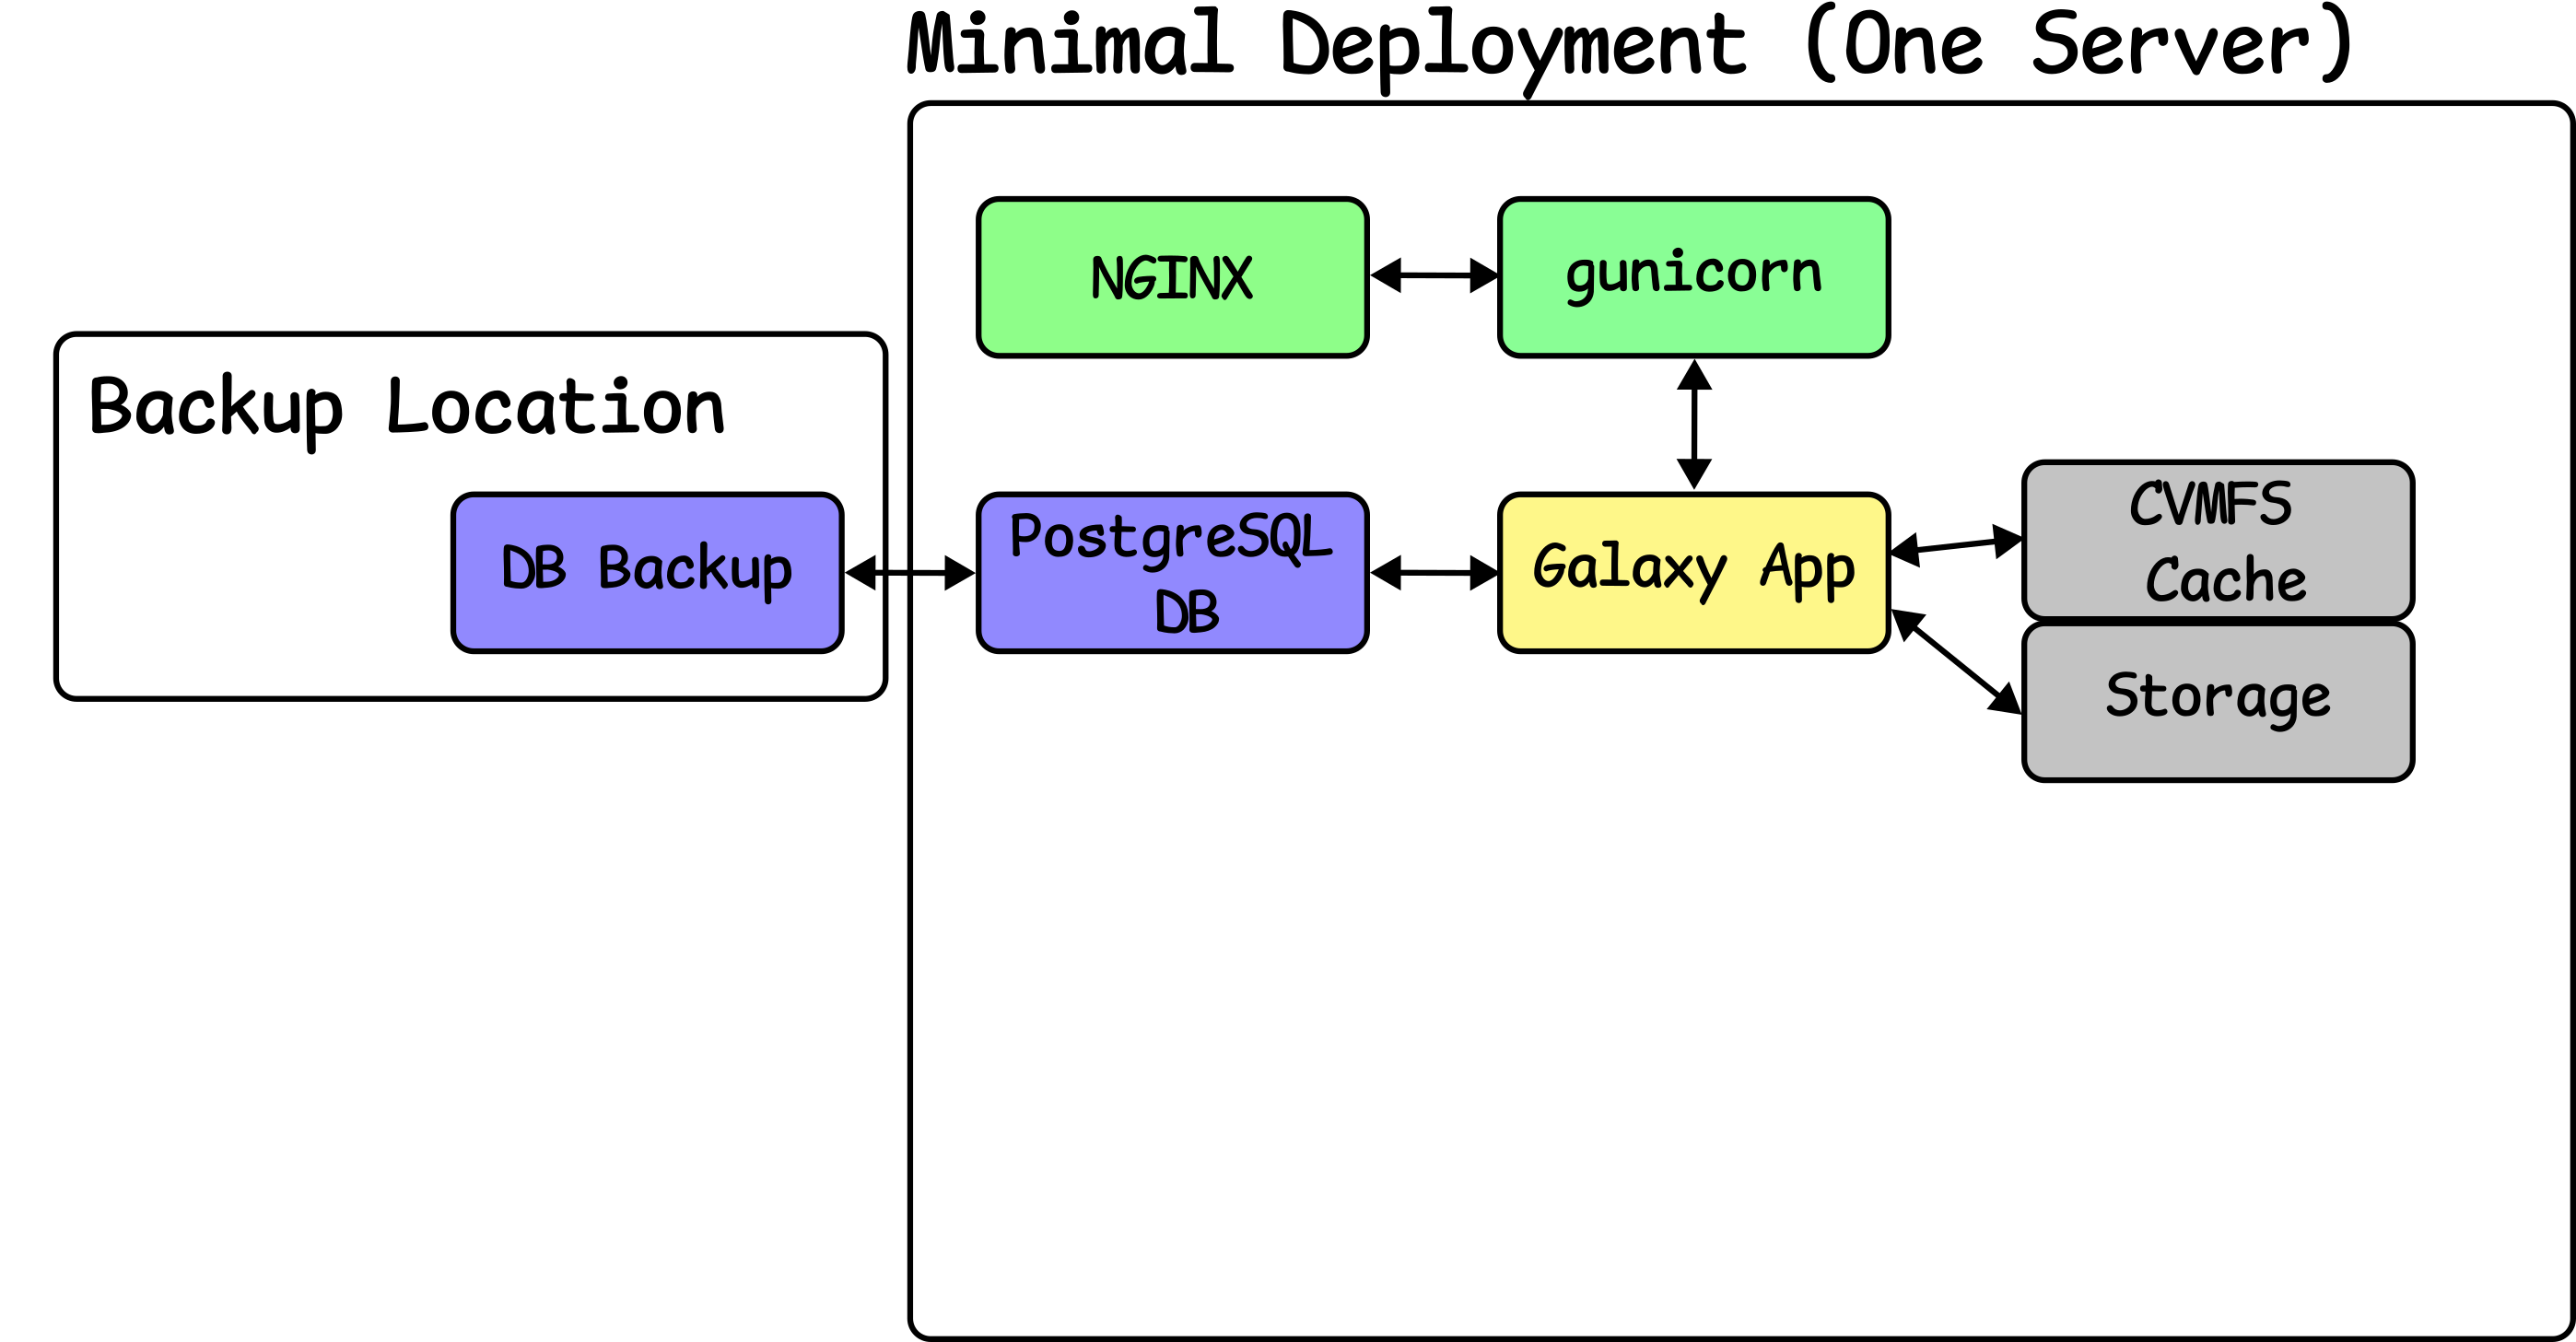 A cvmfs cache is added connected to Galaxy, next to storage